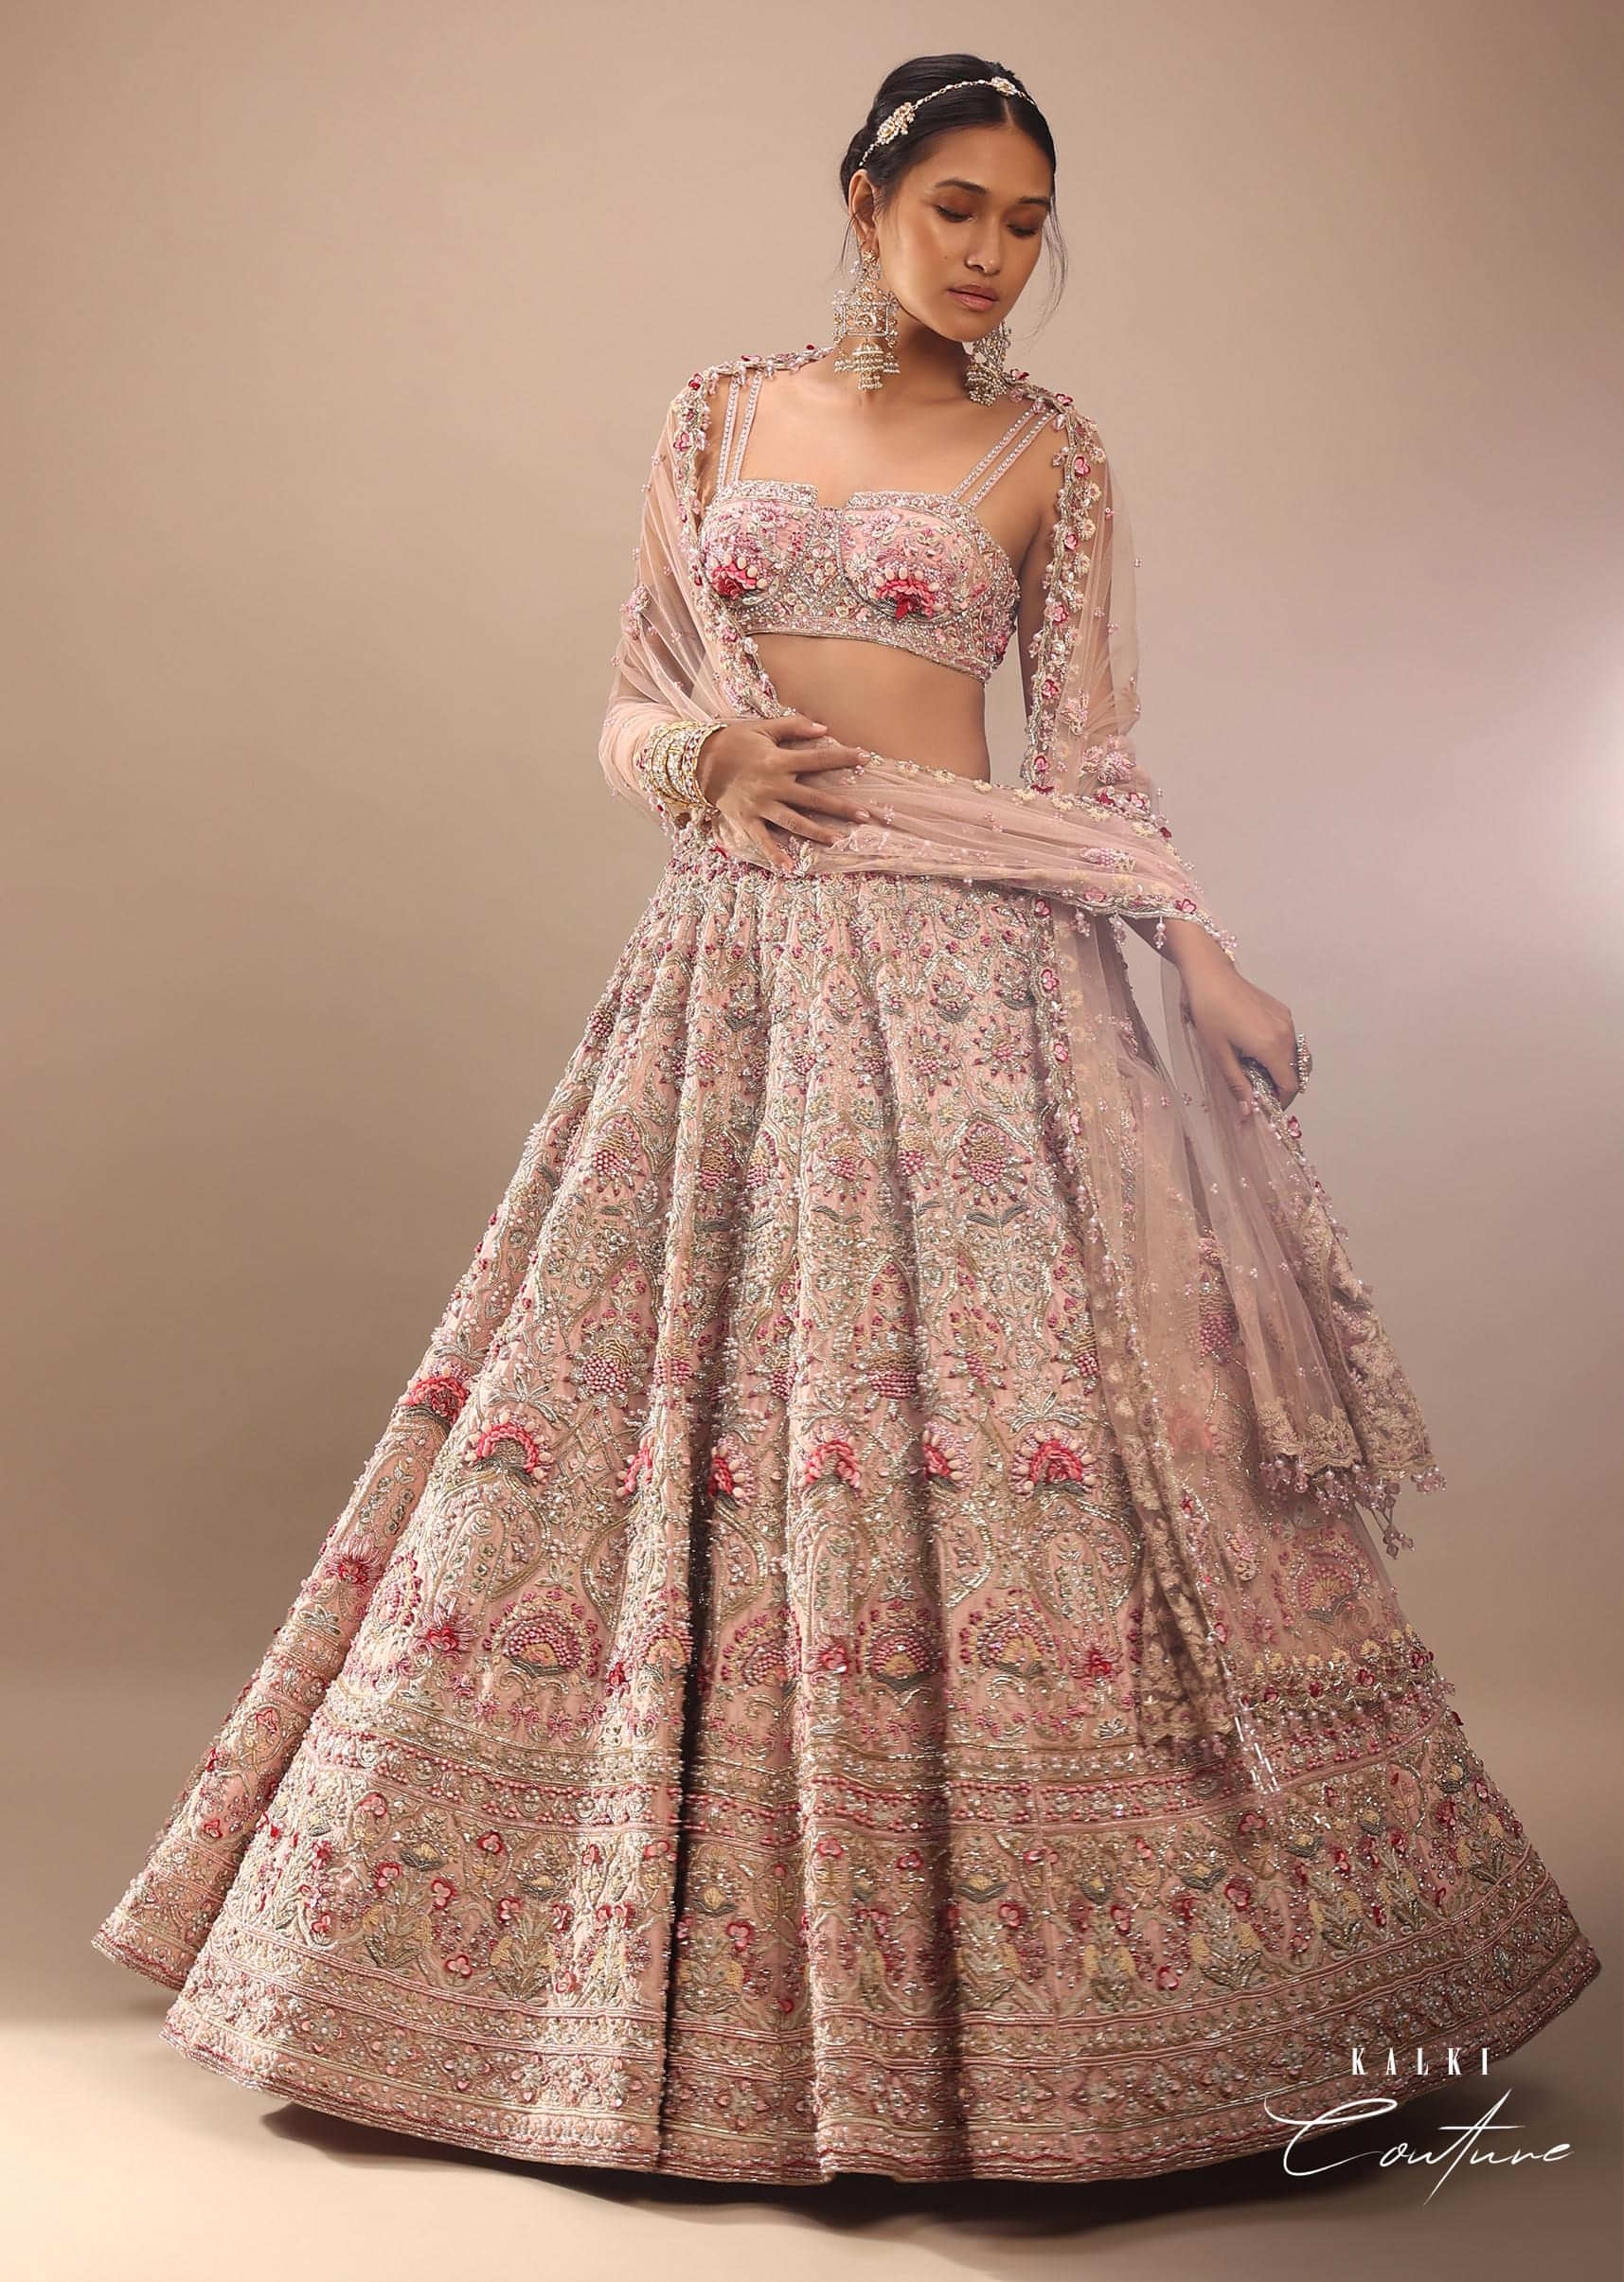 How to Wear Shapewear under Lehenga - Top Tips of Wearing a